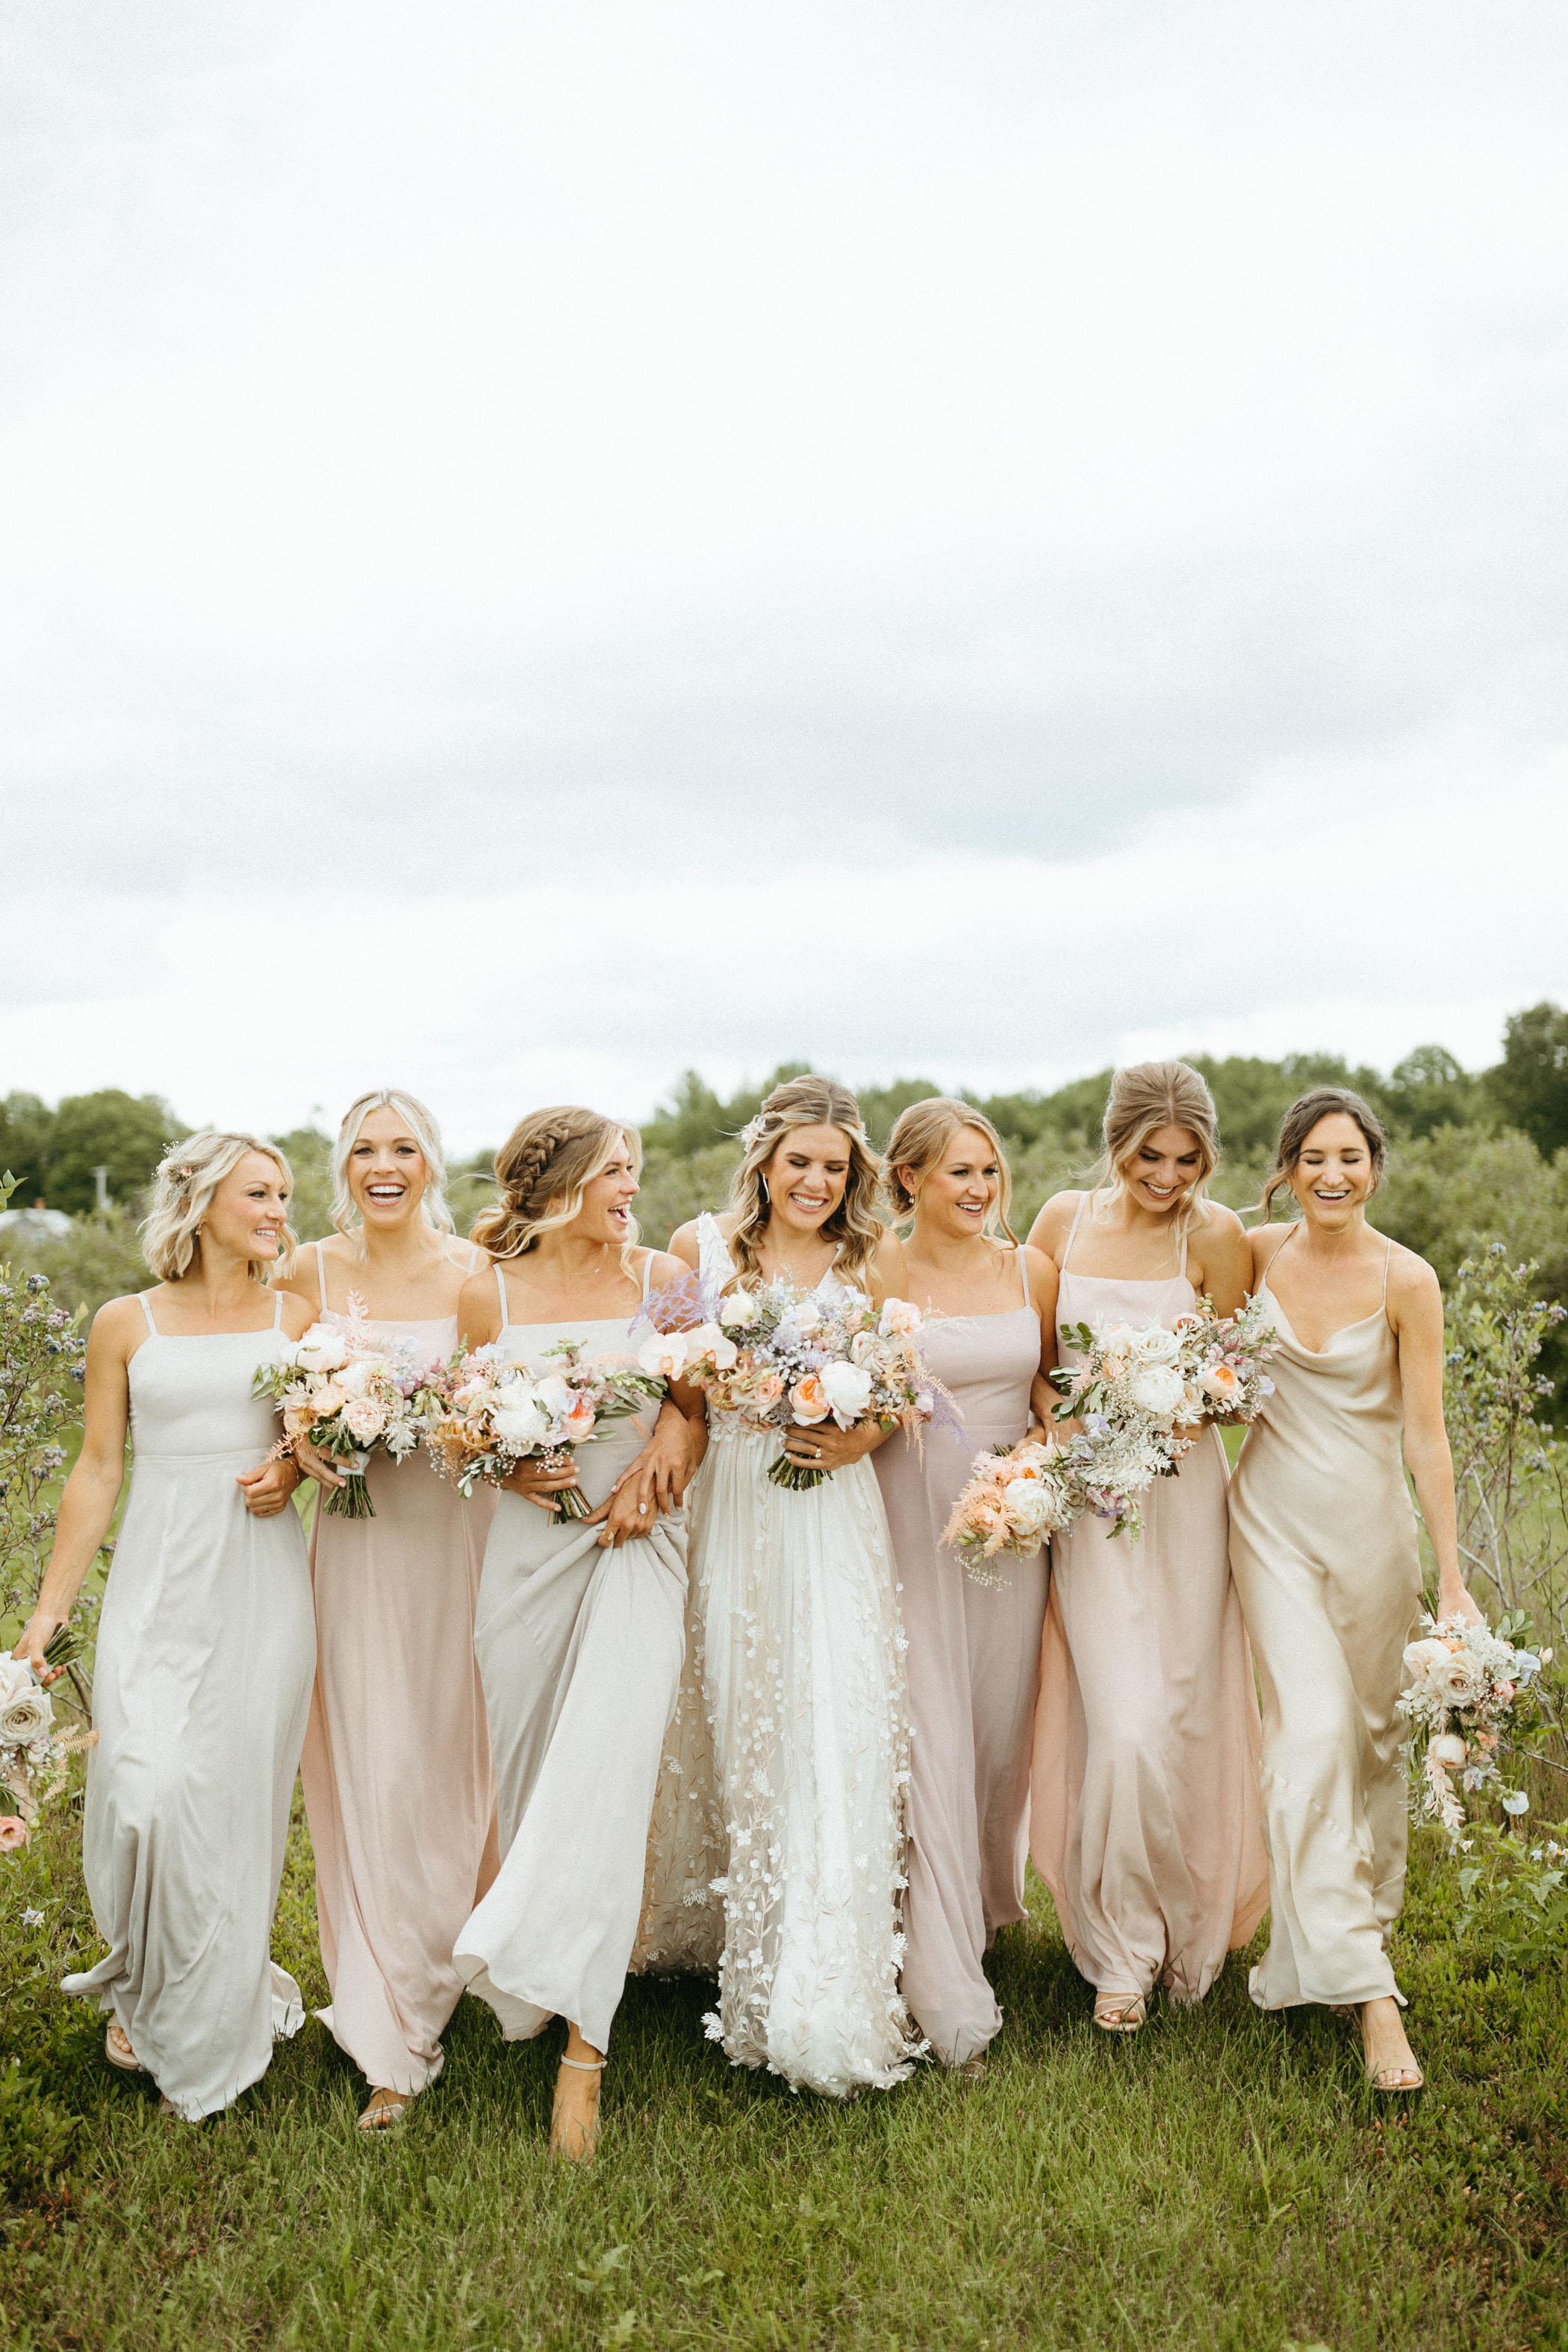 This Wedding at a Blueberry Farm in Michigan Had Midwestern Summer Nostalgia Written All Over It